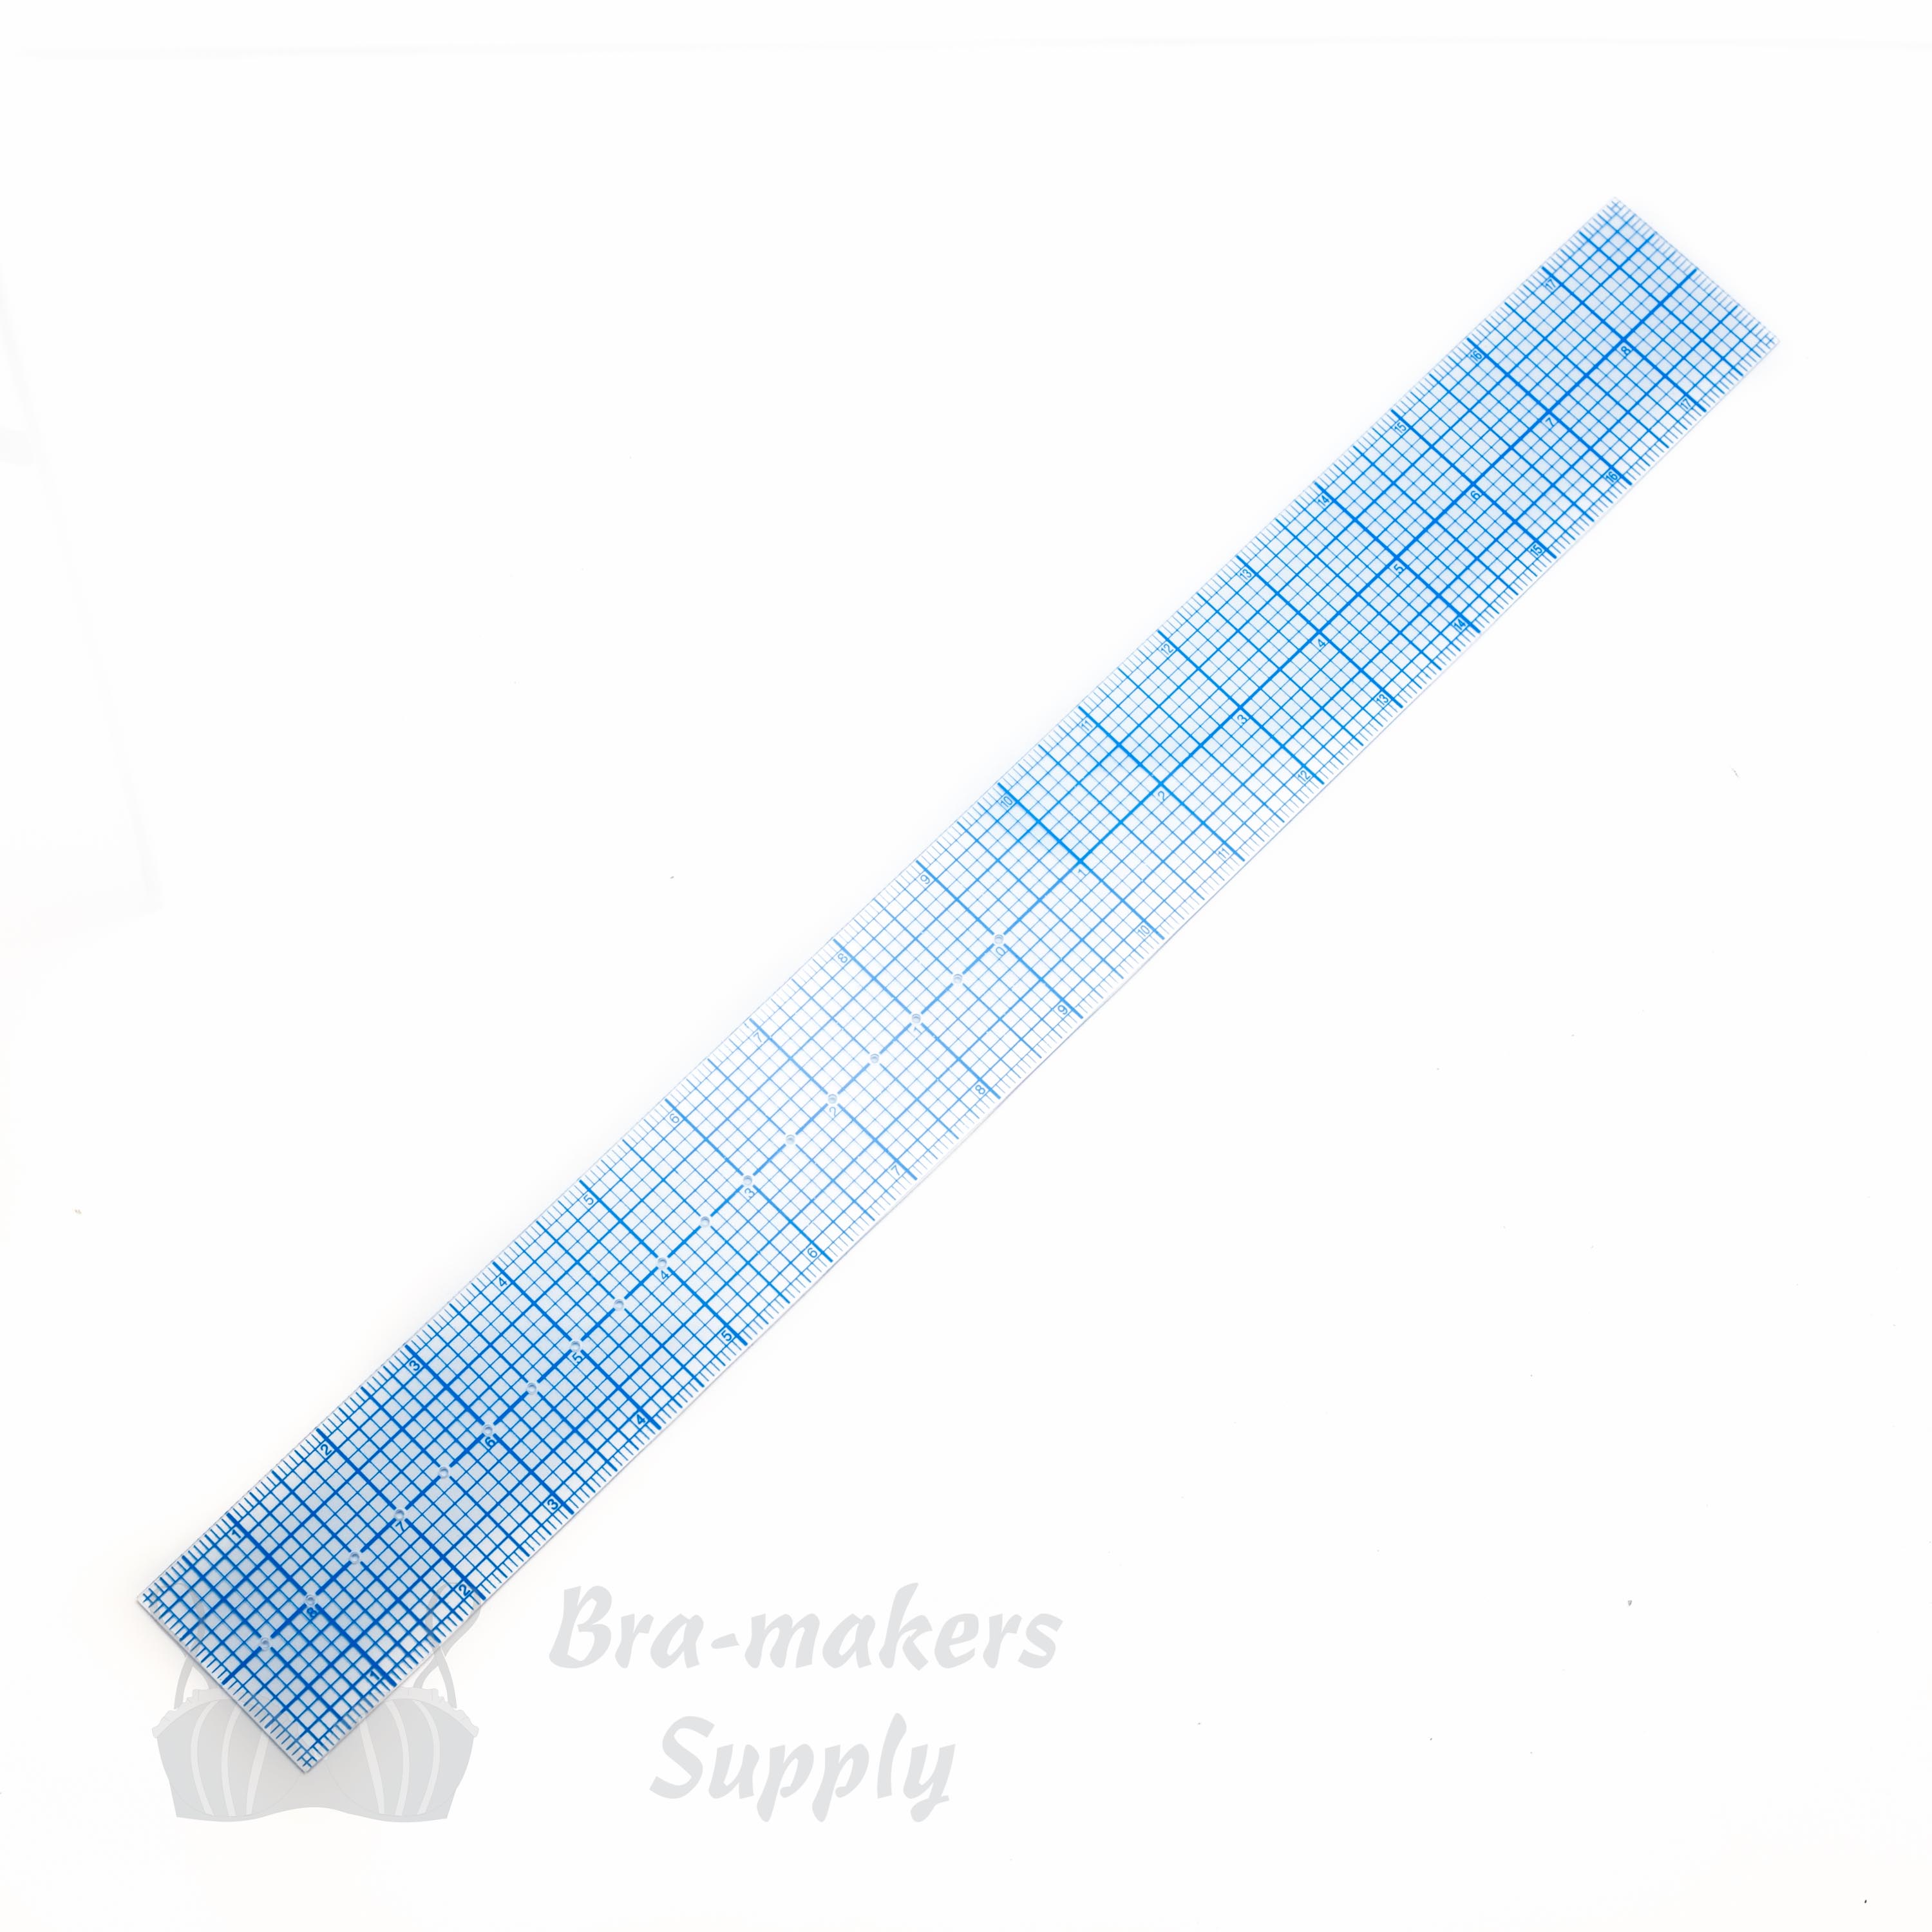 See-Through Ruler - for pattern drafting - Bra-Makers Supply